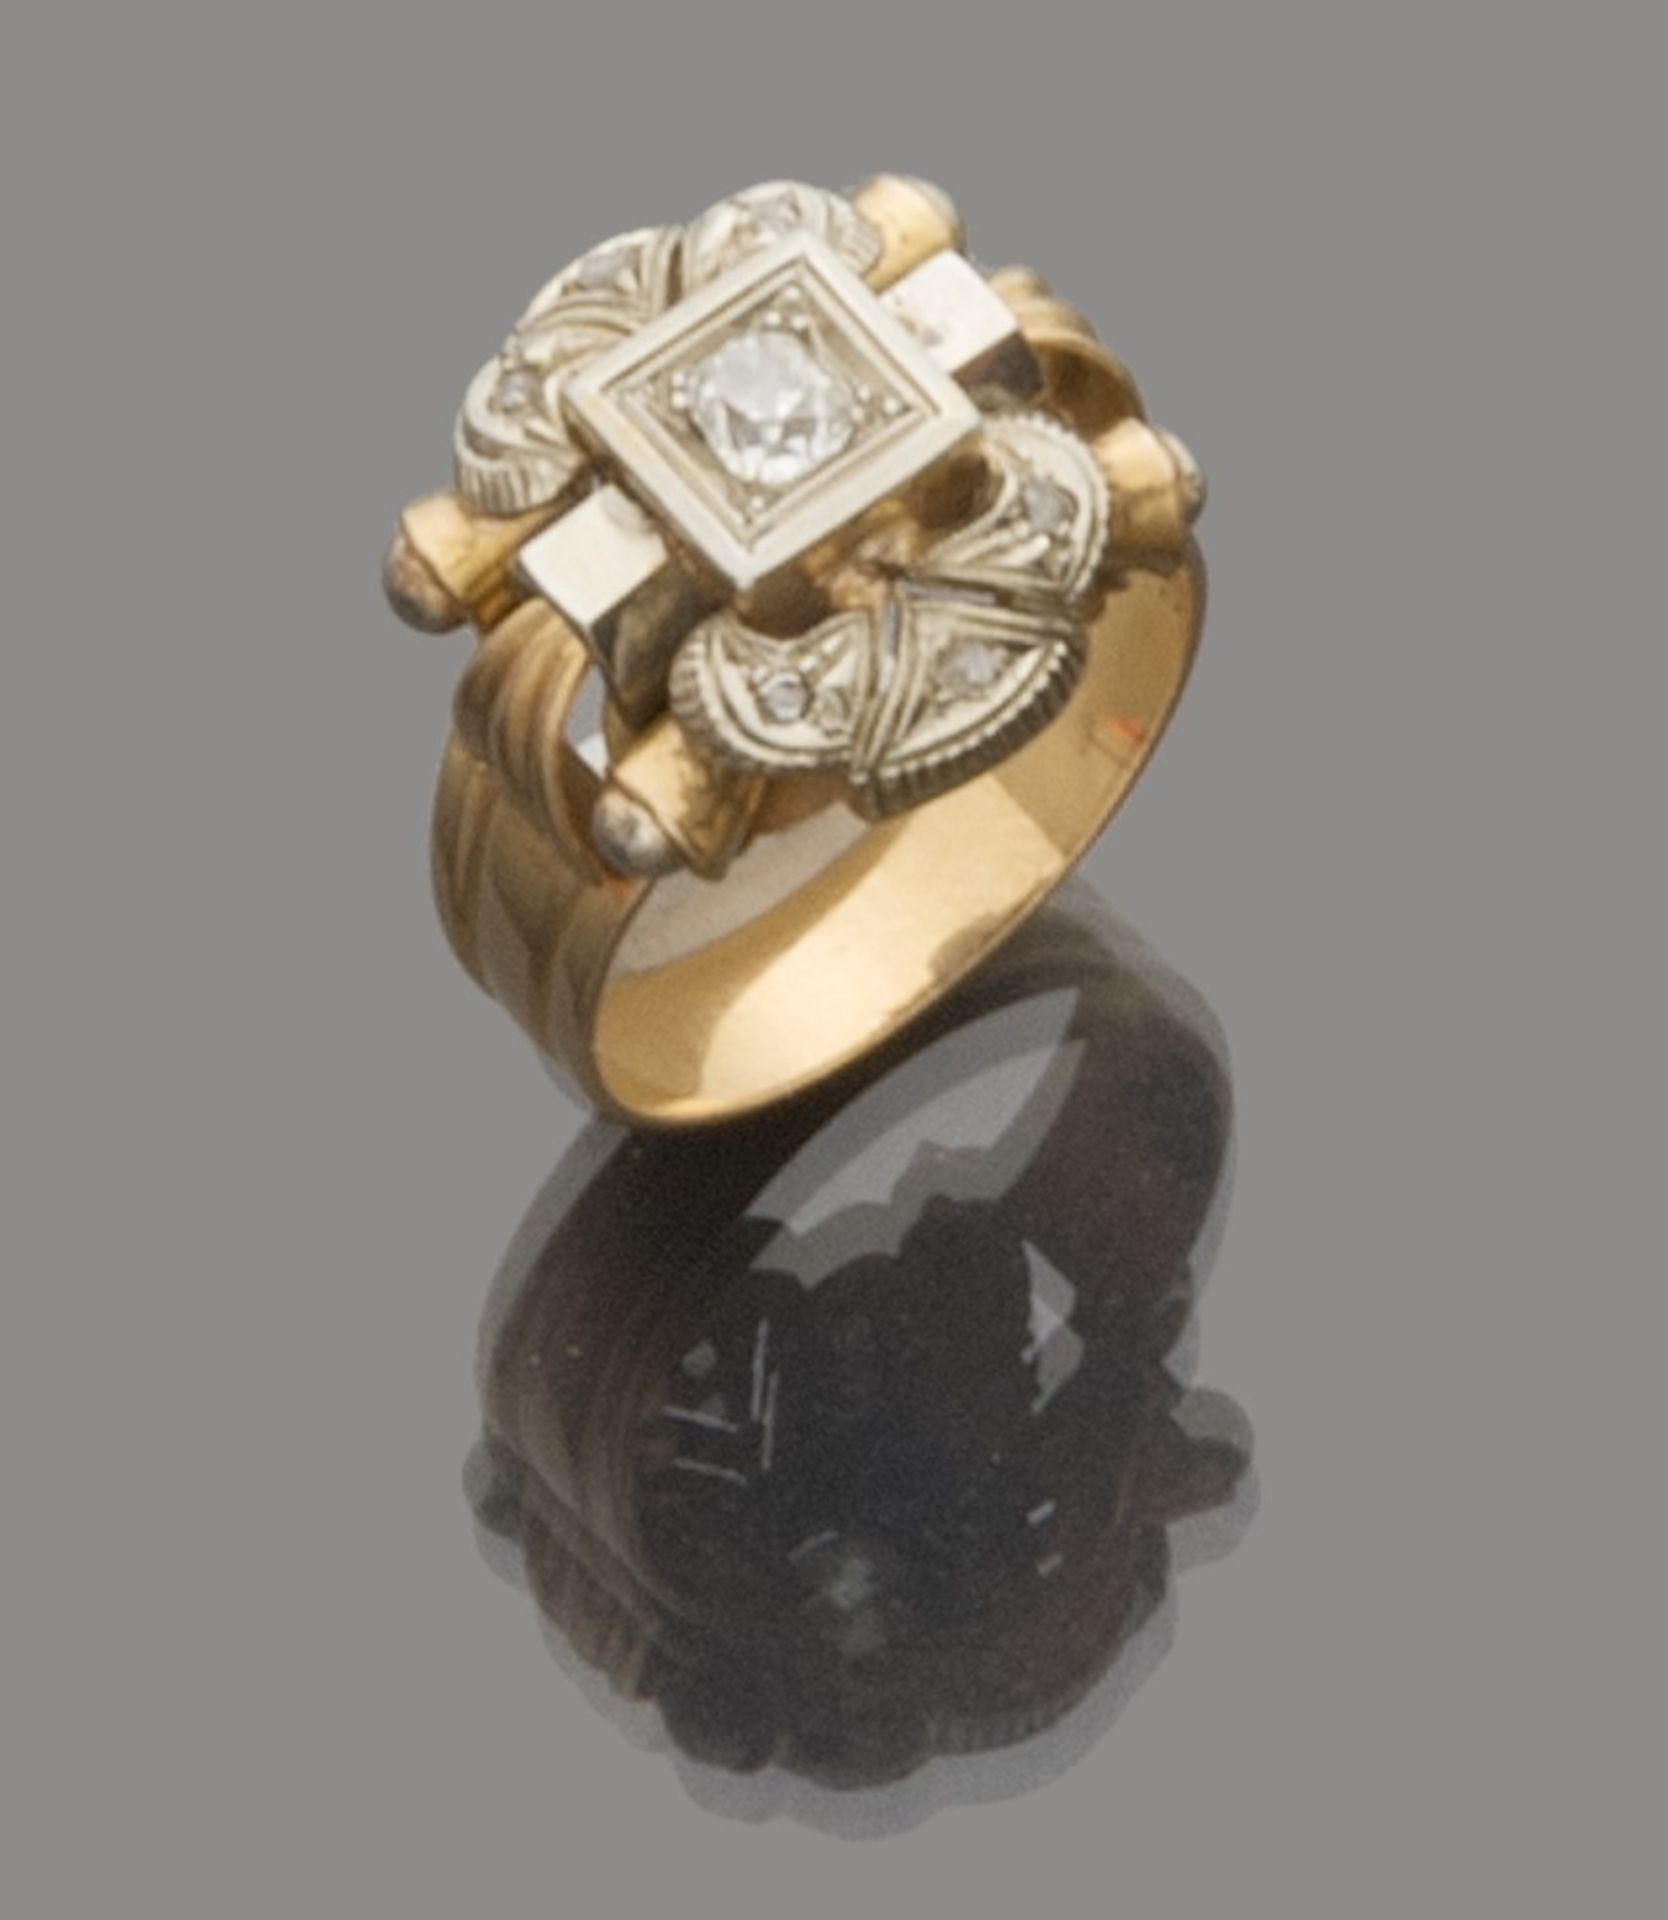 RING in yellow gold 18 kt., with diamond. Diamond ct. 0.20, total weight gr. 6,80. ANELLO in oro